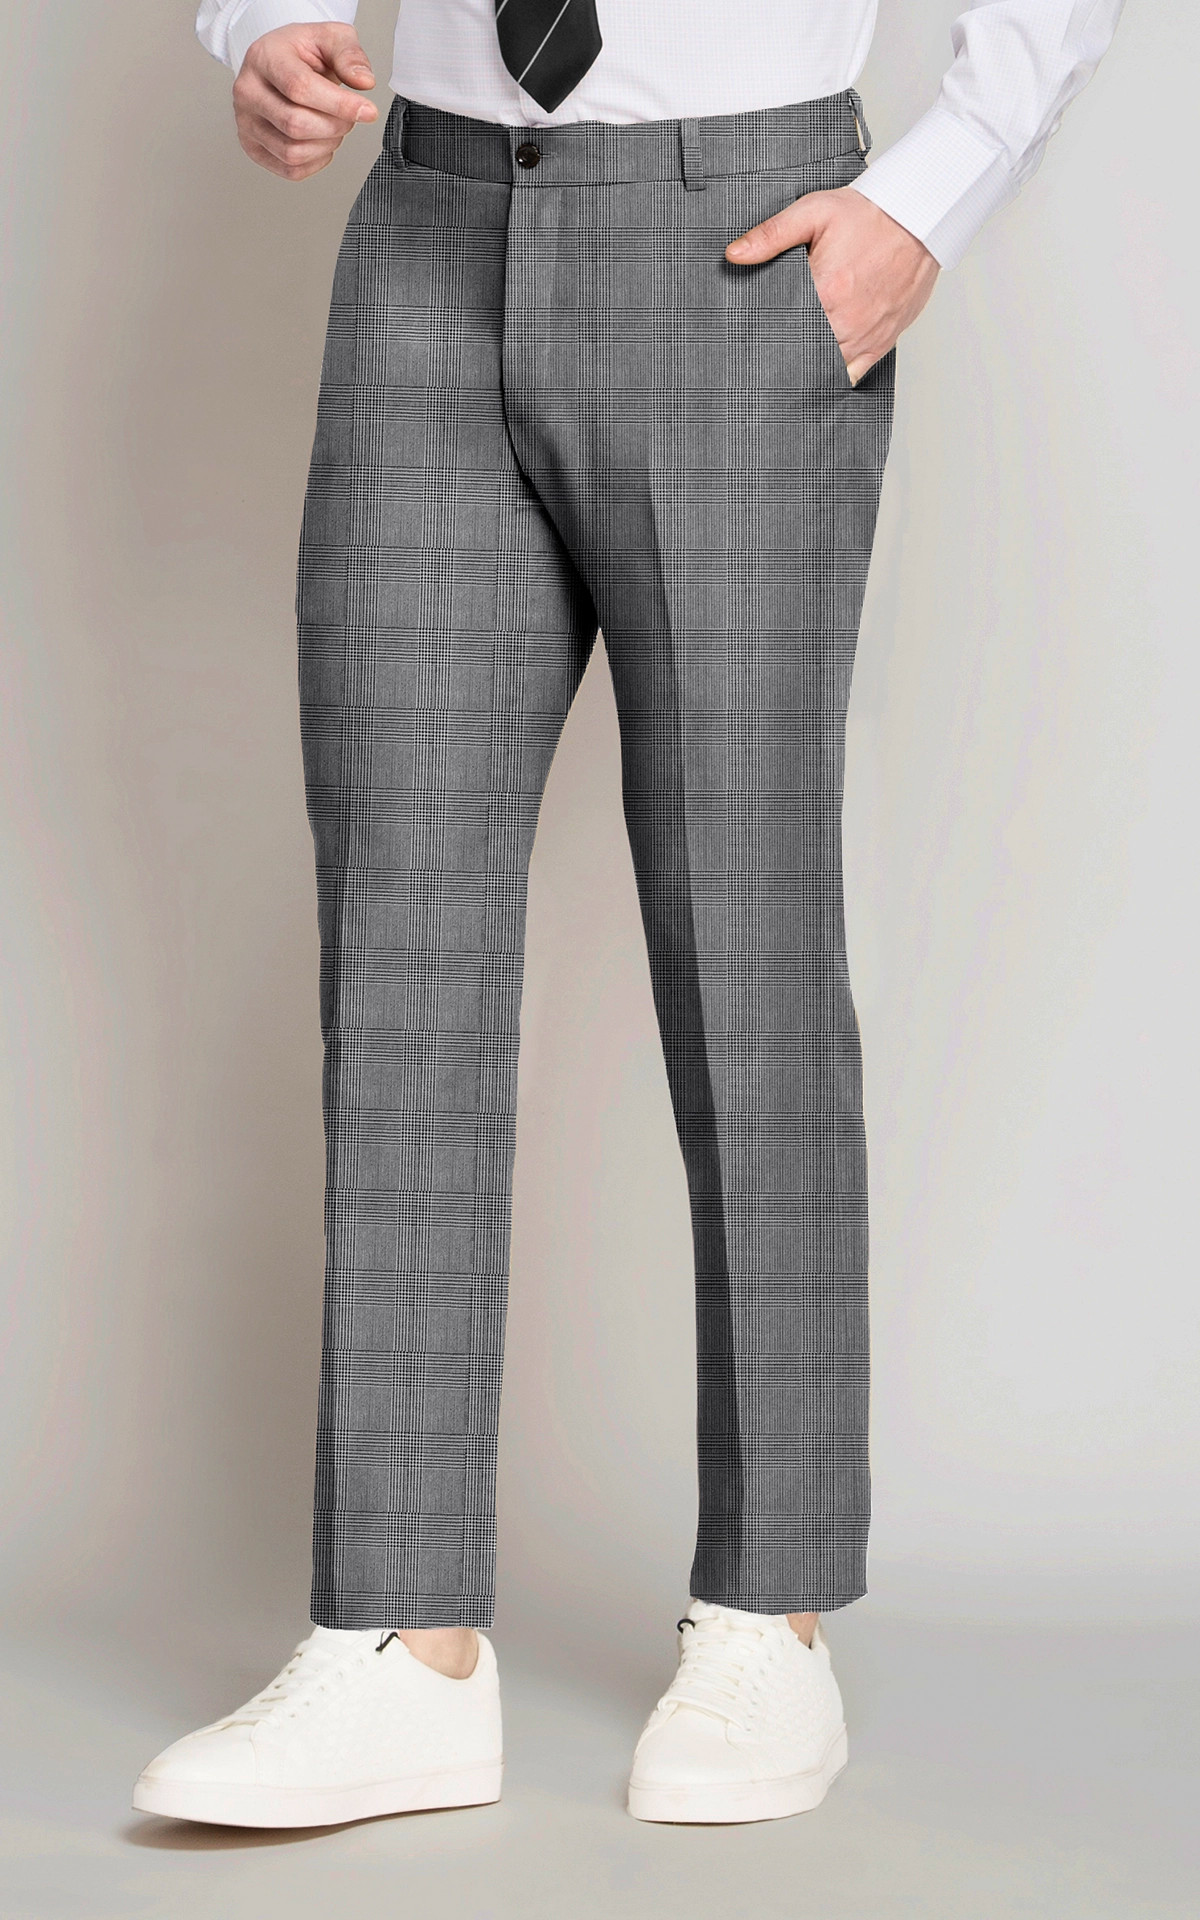 Burberry Men's Houndstooth Check Plaid Tailored Trousers, Brand Size 46  (Waist Size 31.1